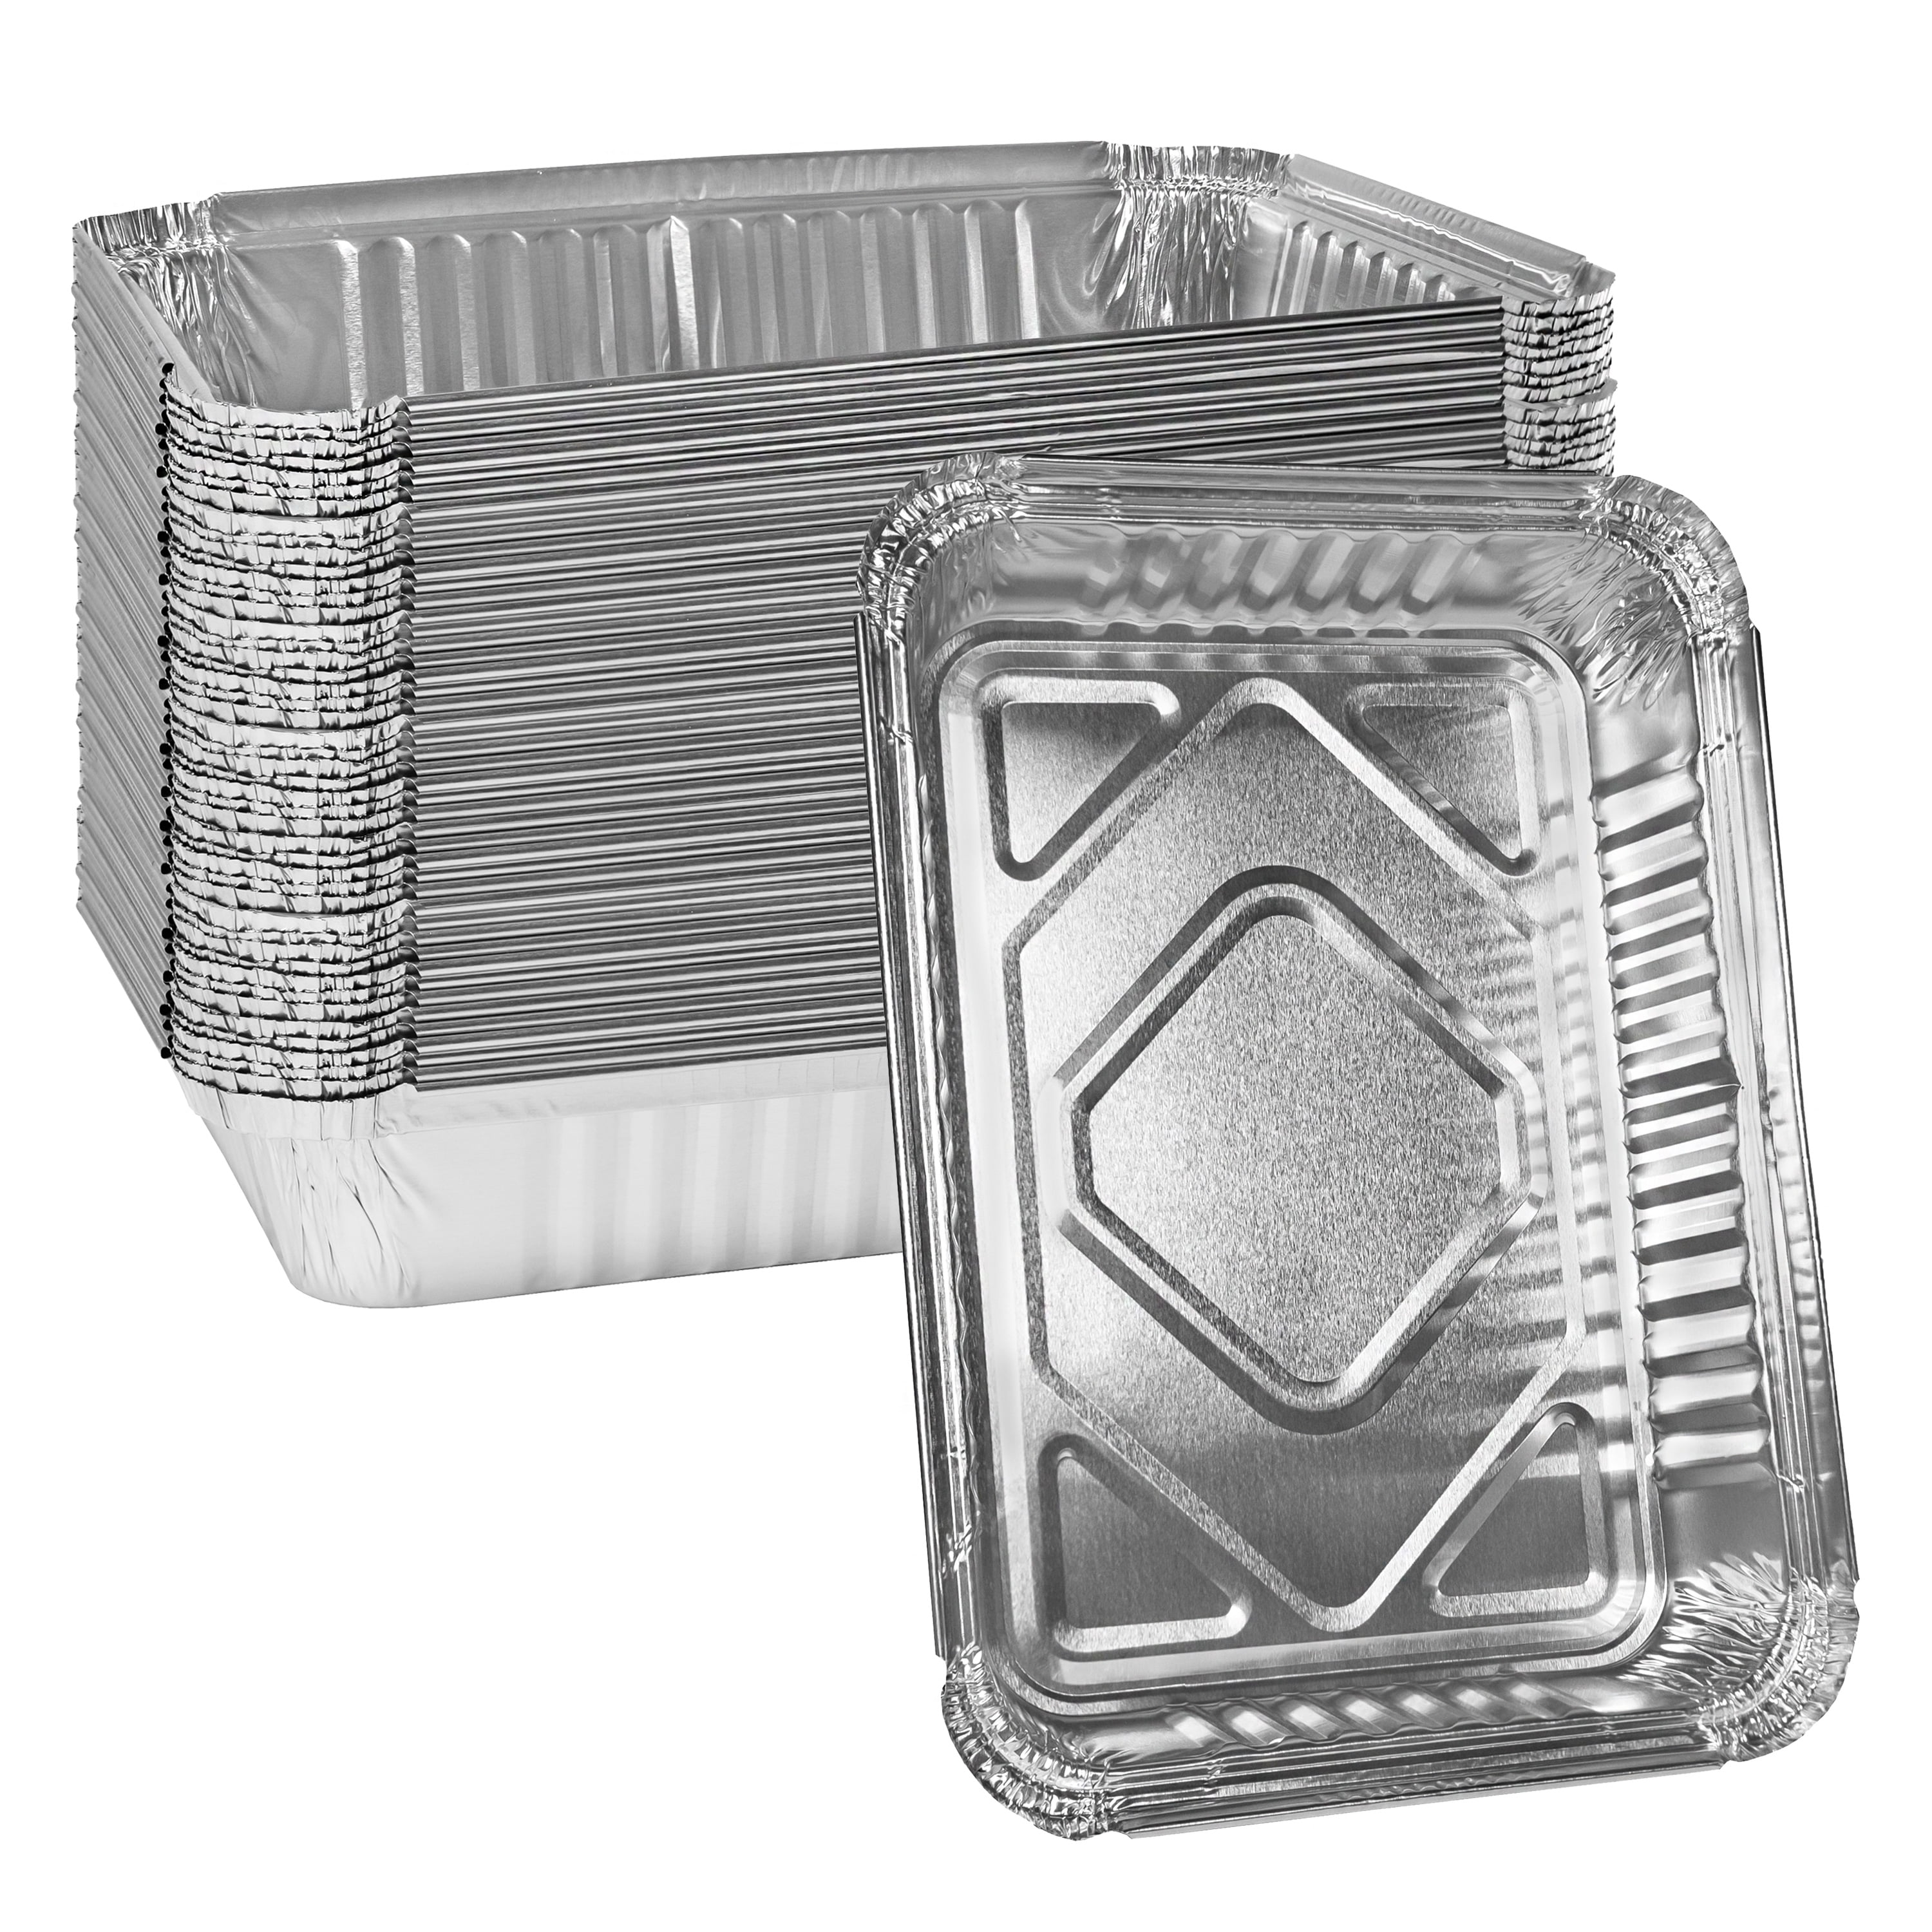 Displastible Disposable Aluminum Pans with Lids Freezer and Oven